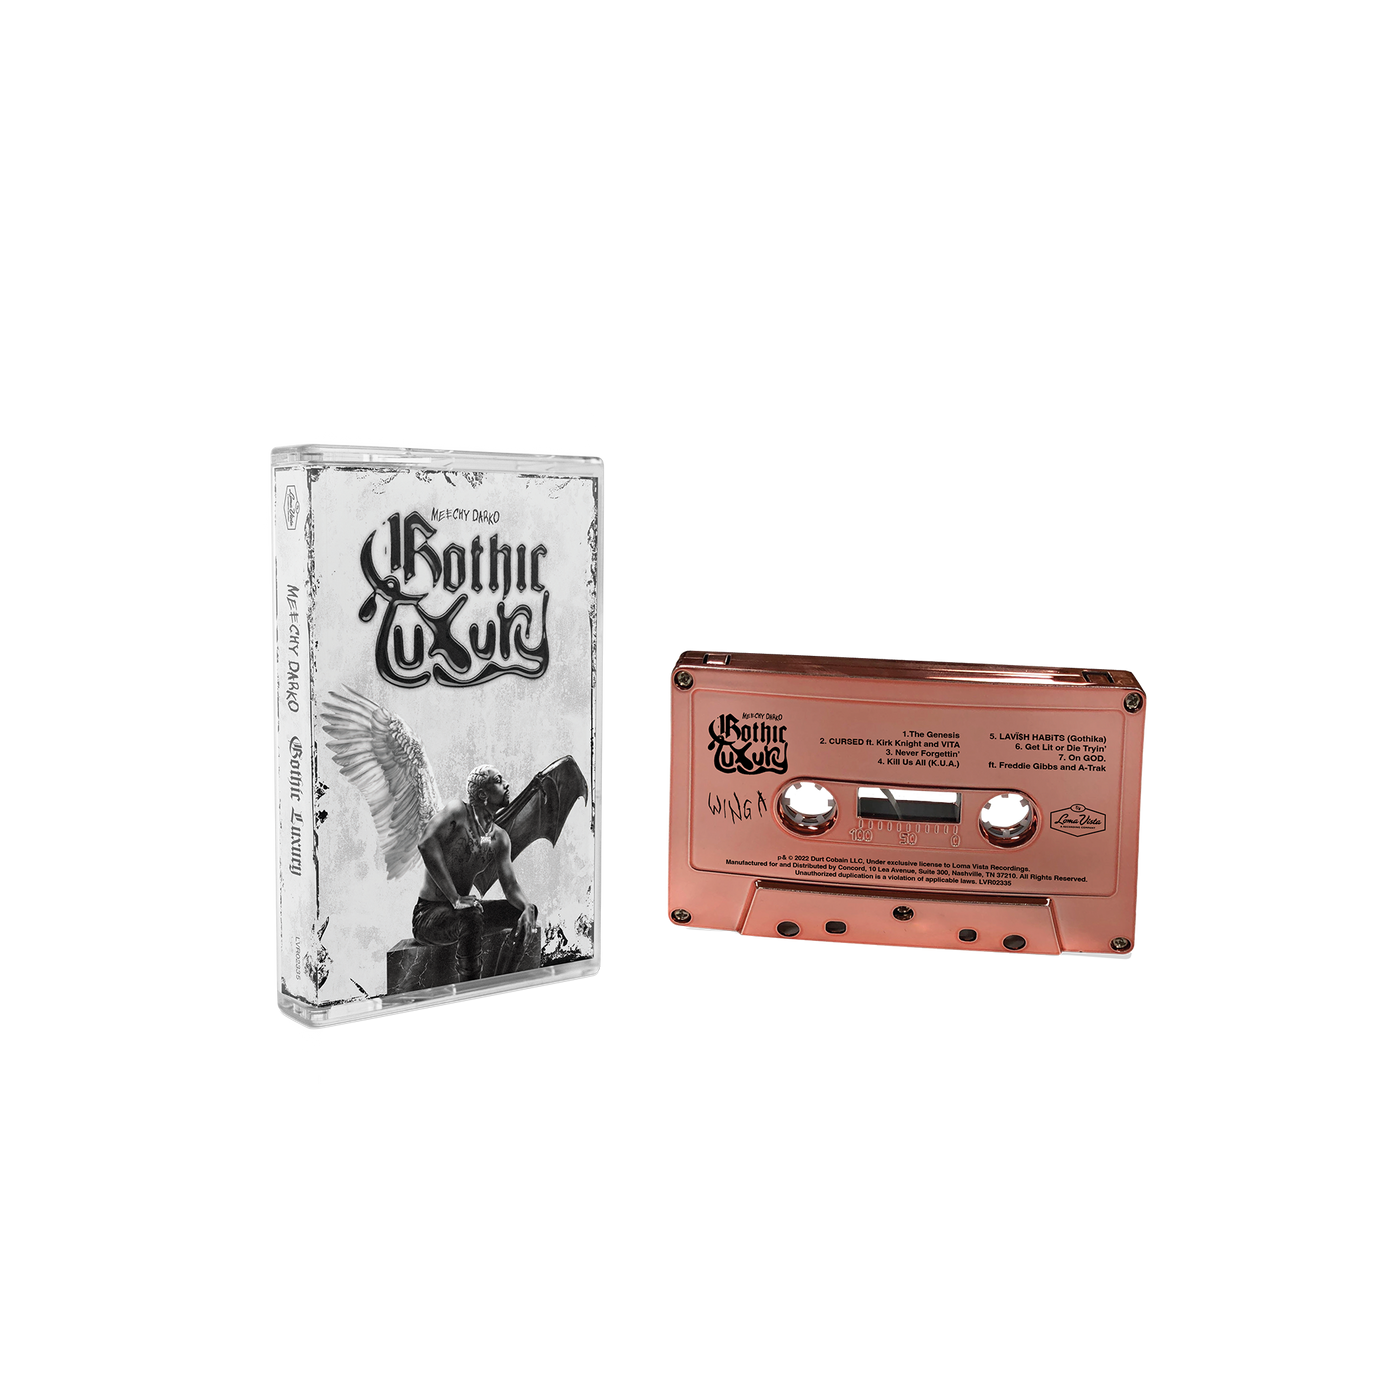 Limited Edition Cassette + Poster + Coin Box Set